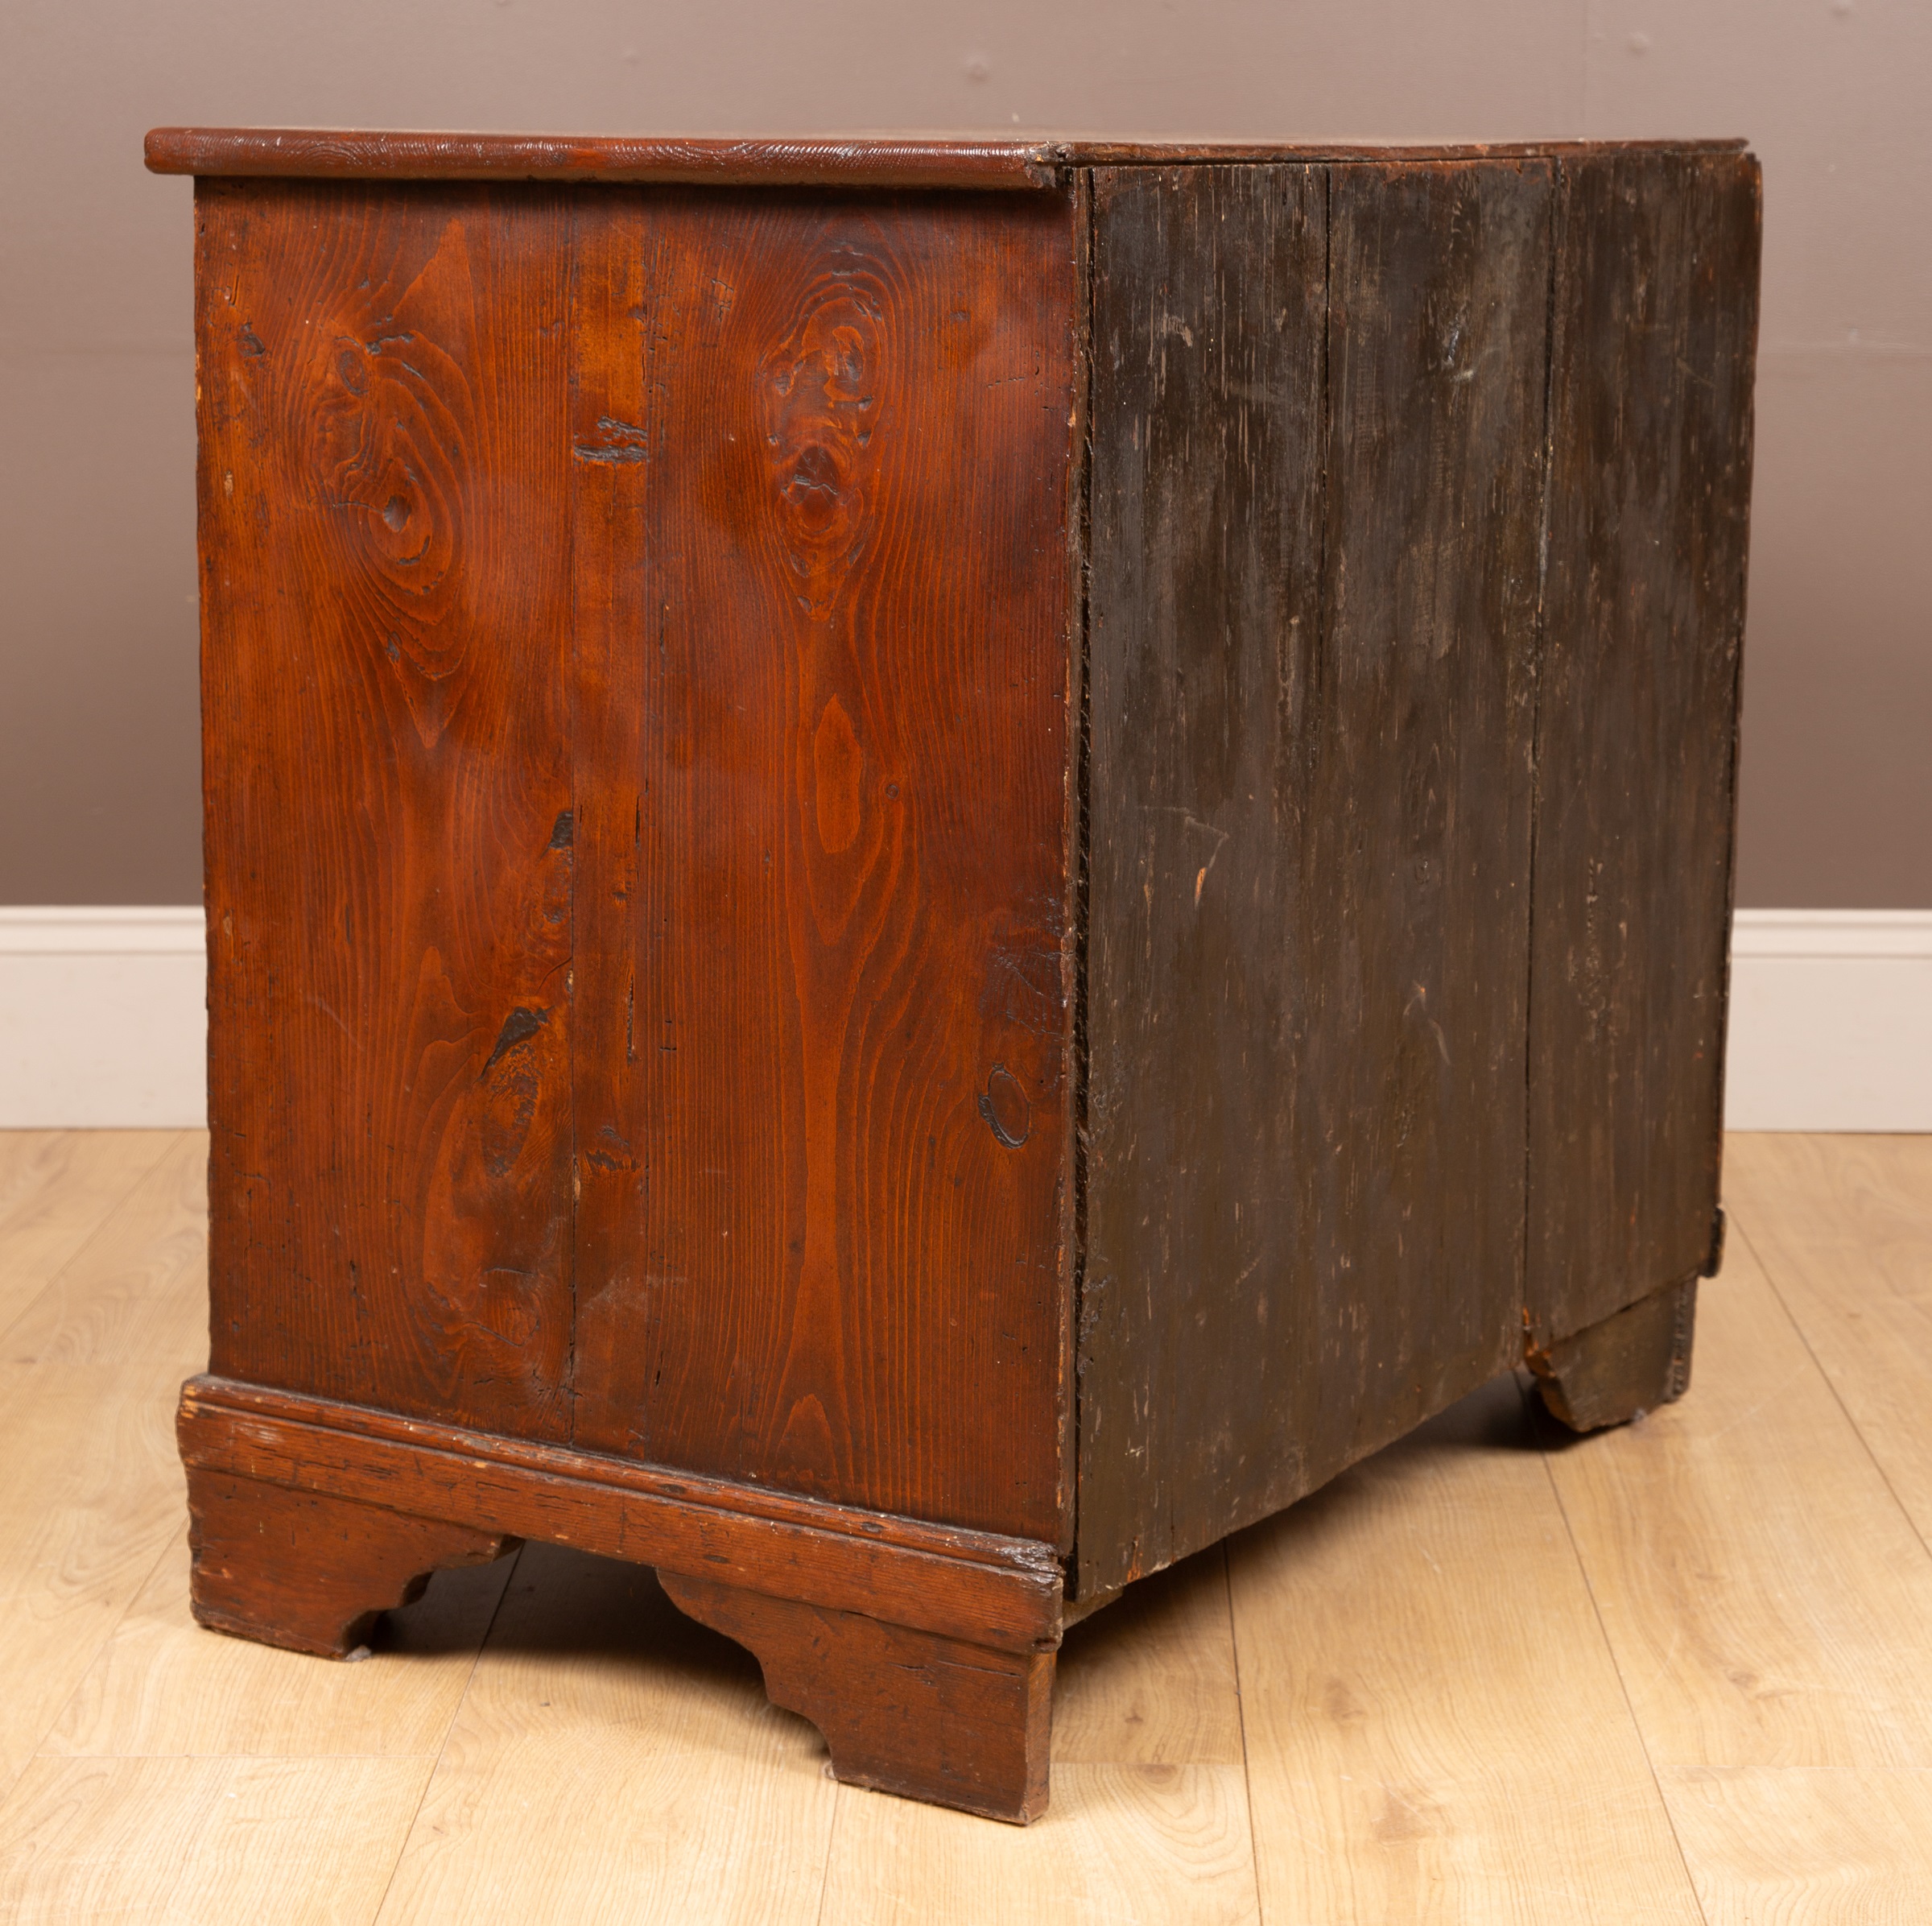 An antique pitch pine chest of drawers - Image 2 of 5